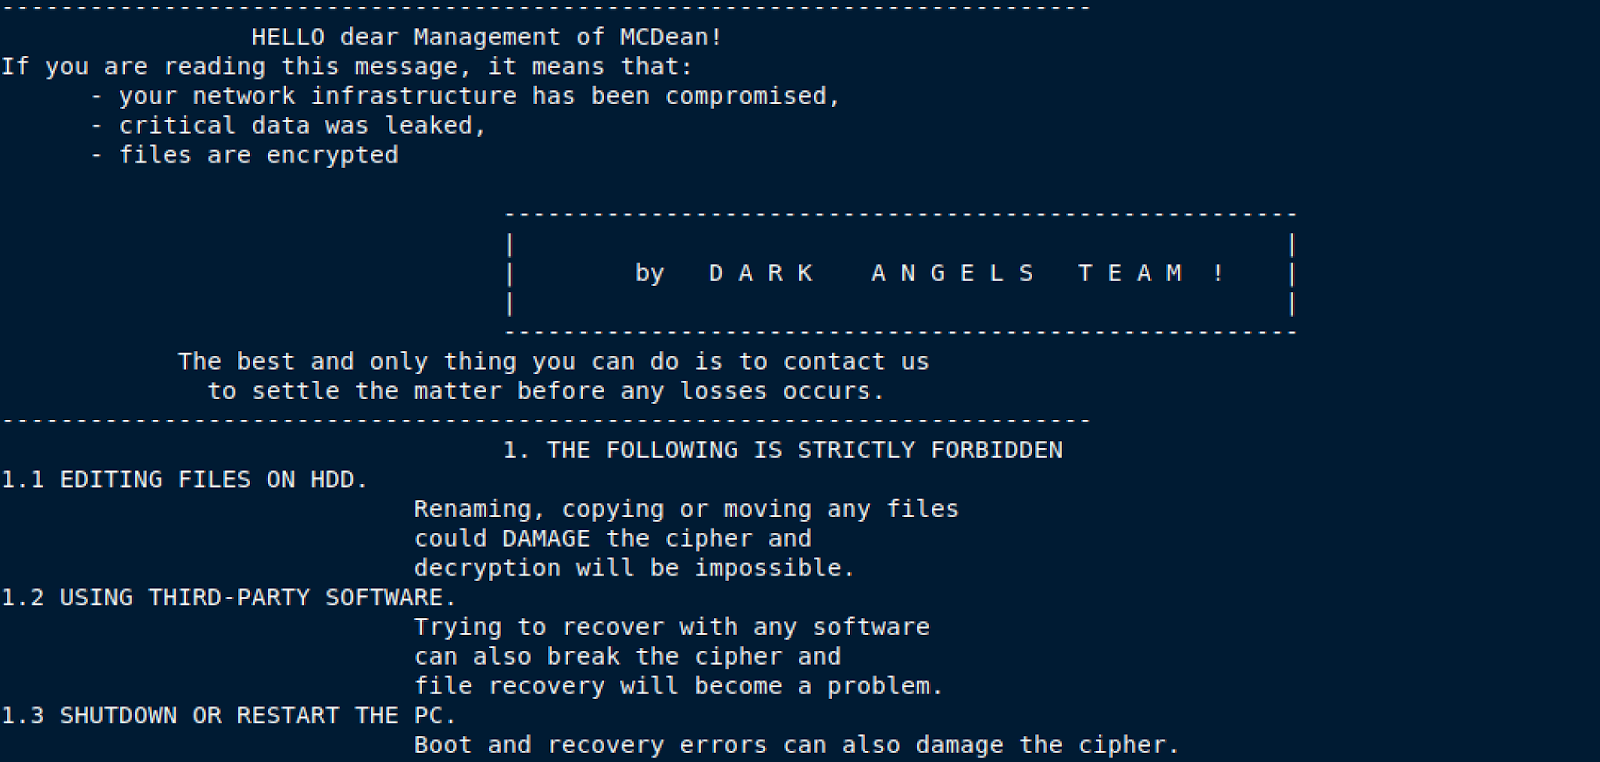 Another Ransomware For Linux Likely In Development